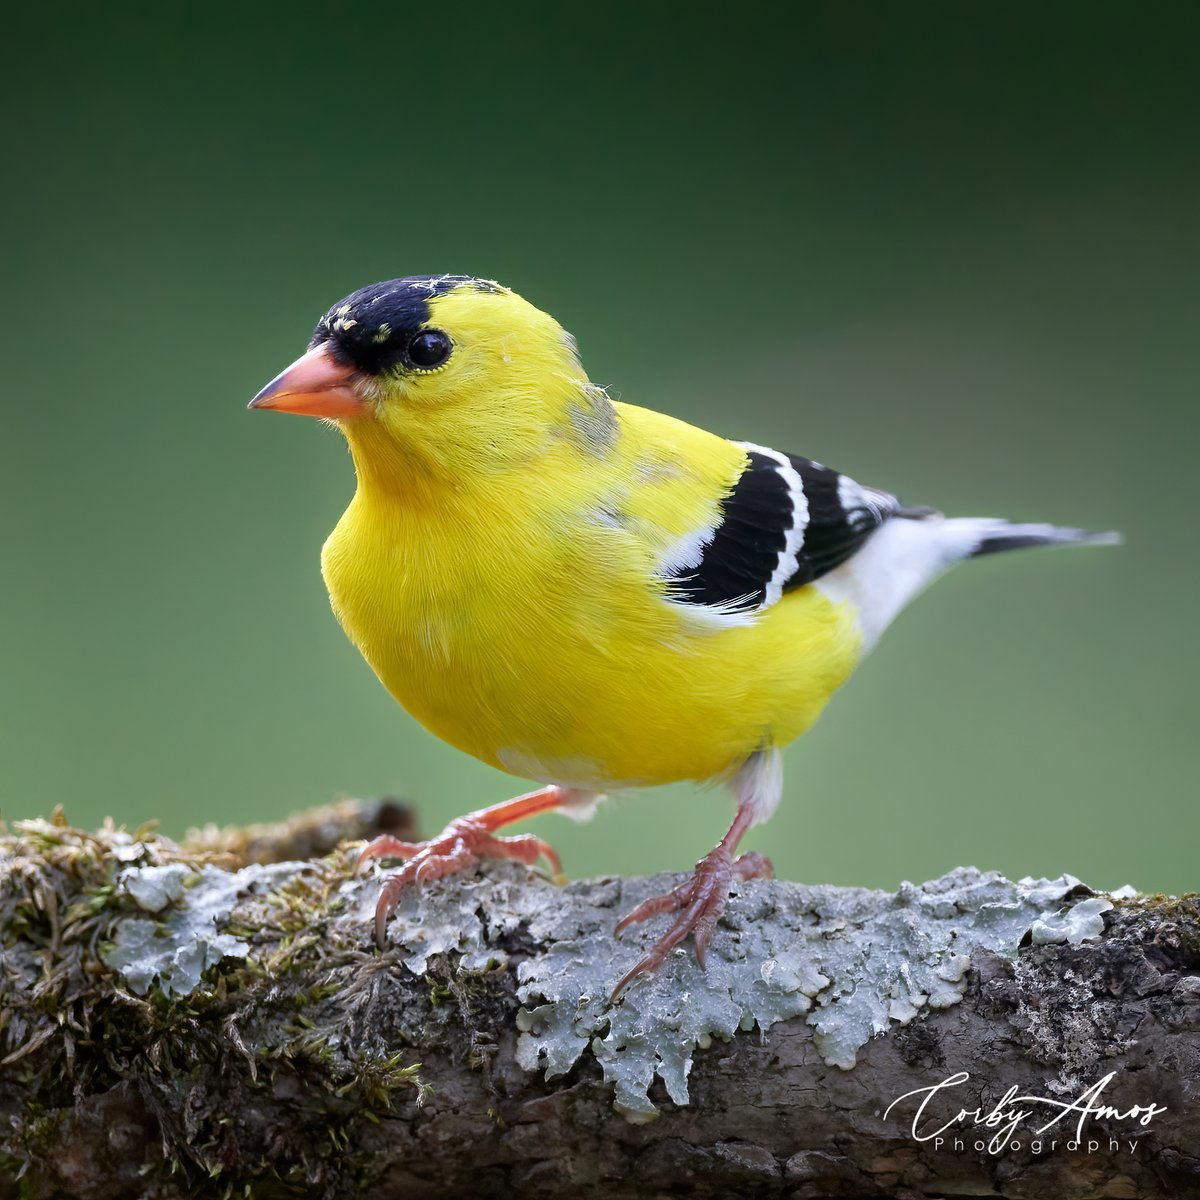 These fellas make me smile. They were gone for a month or two. Now they're back to show off. American Goldfinch.
.
.
#birdphotography #birdwatching #birding #BirdTwitter #twitterbirds #birdpics #americangoldfinch